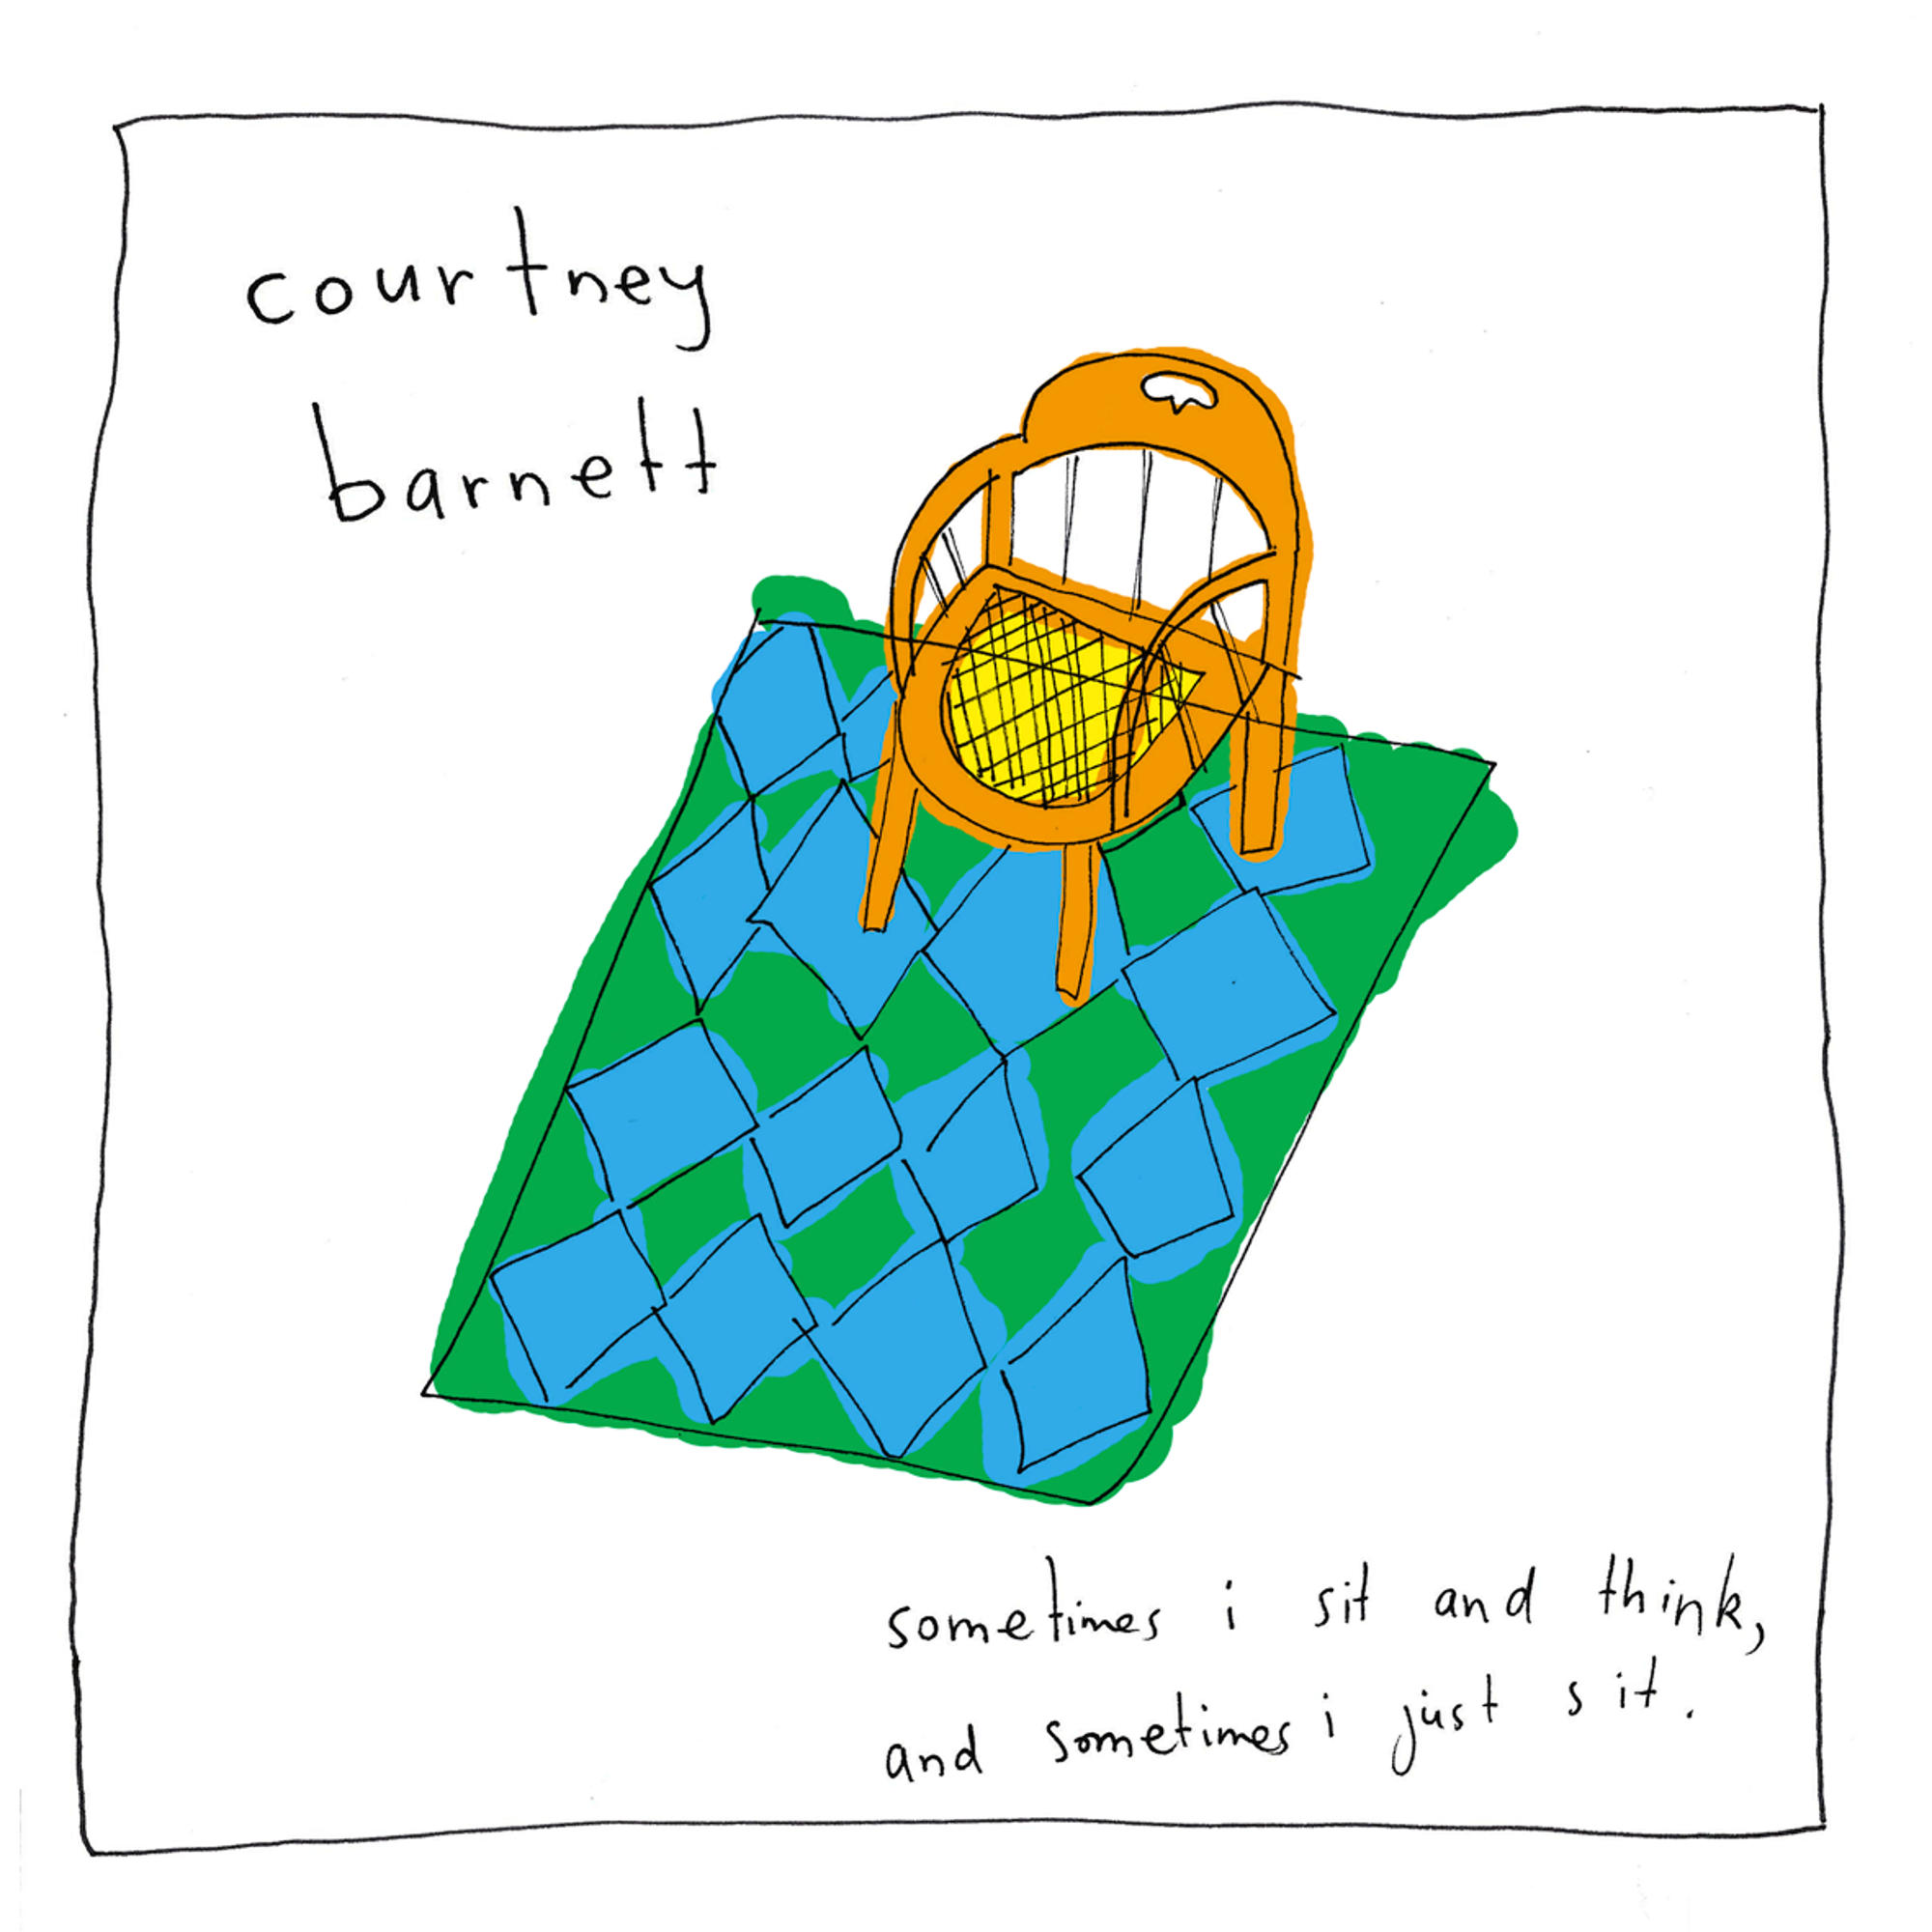 Courtney Barnett - Sometimes I - Think, Sit And (Vinyl) Sometimes...(Lp+Mp3) And